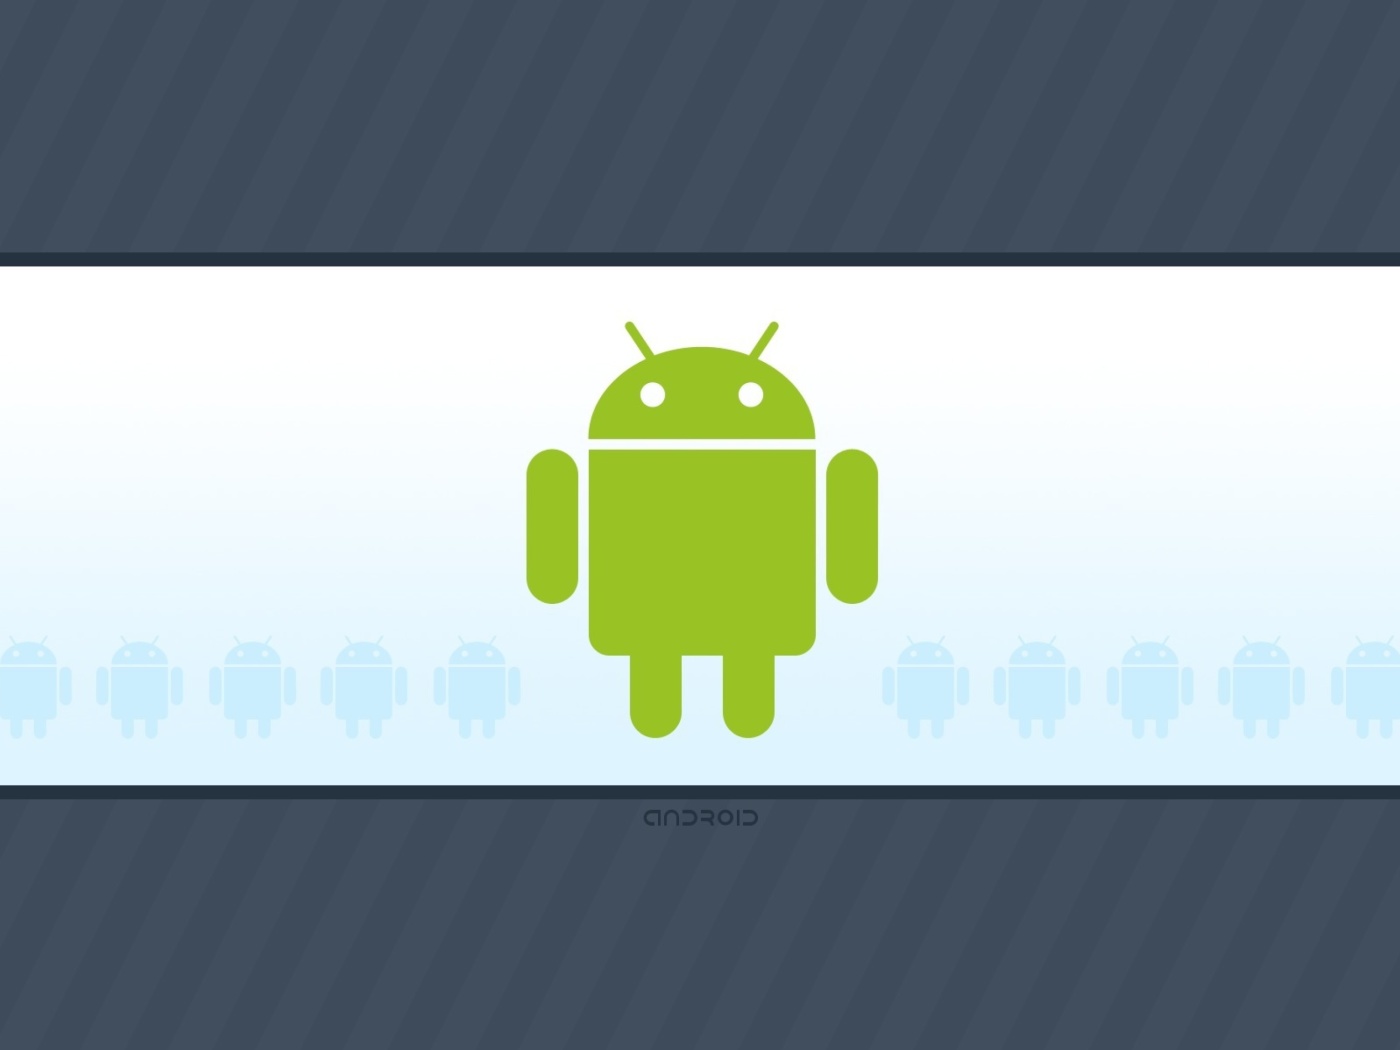 Android Phone Logo wallpaper 1400x1050